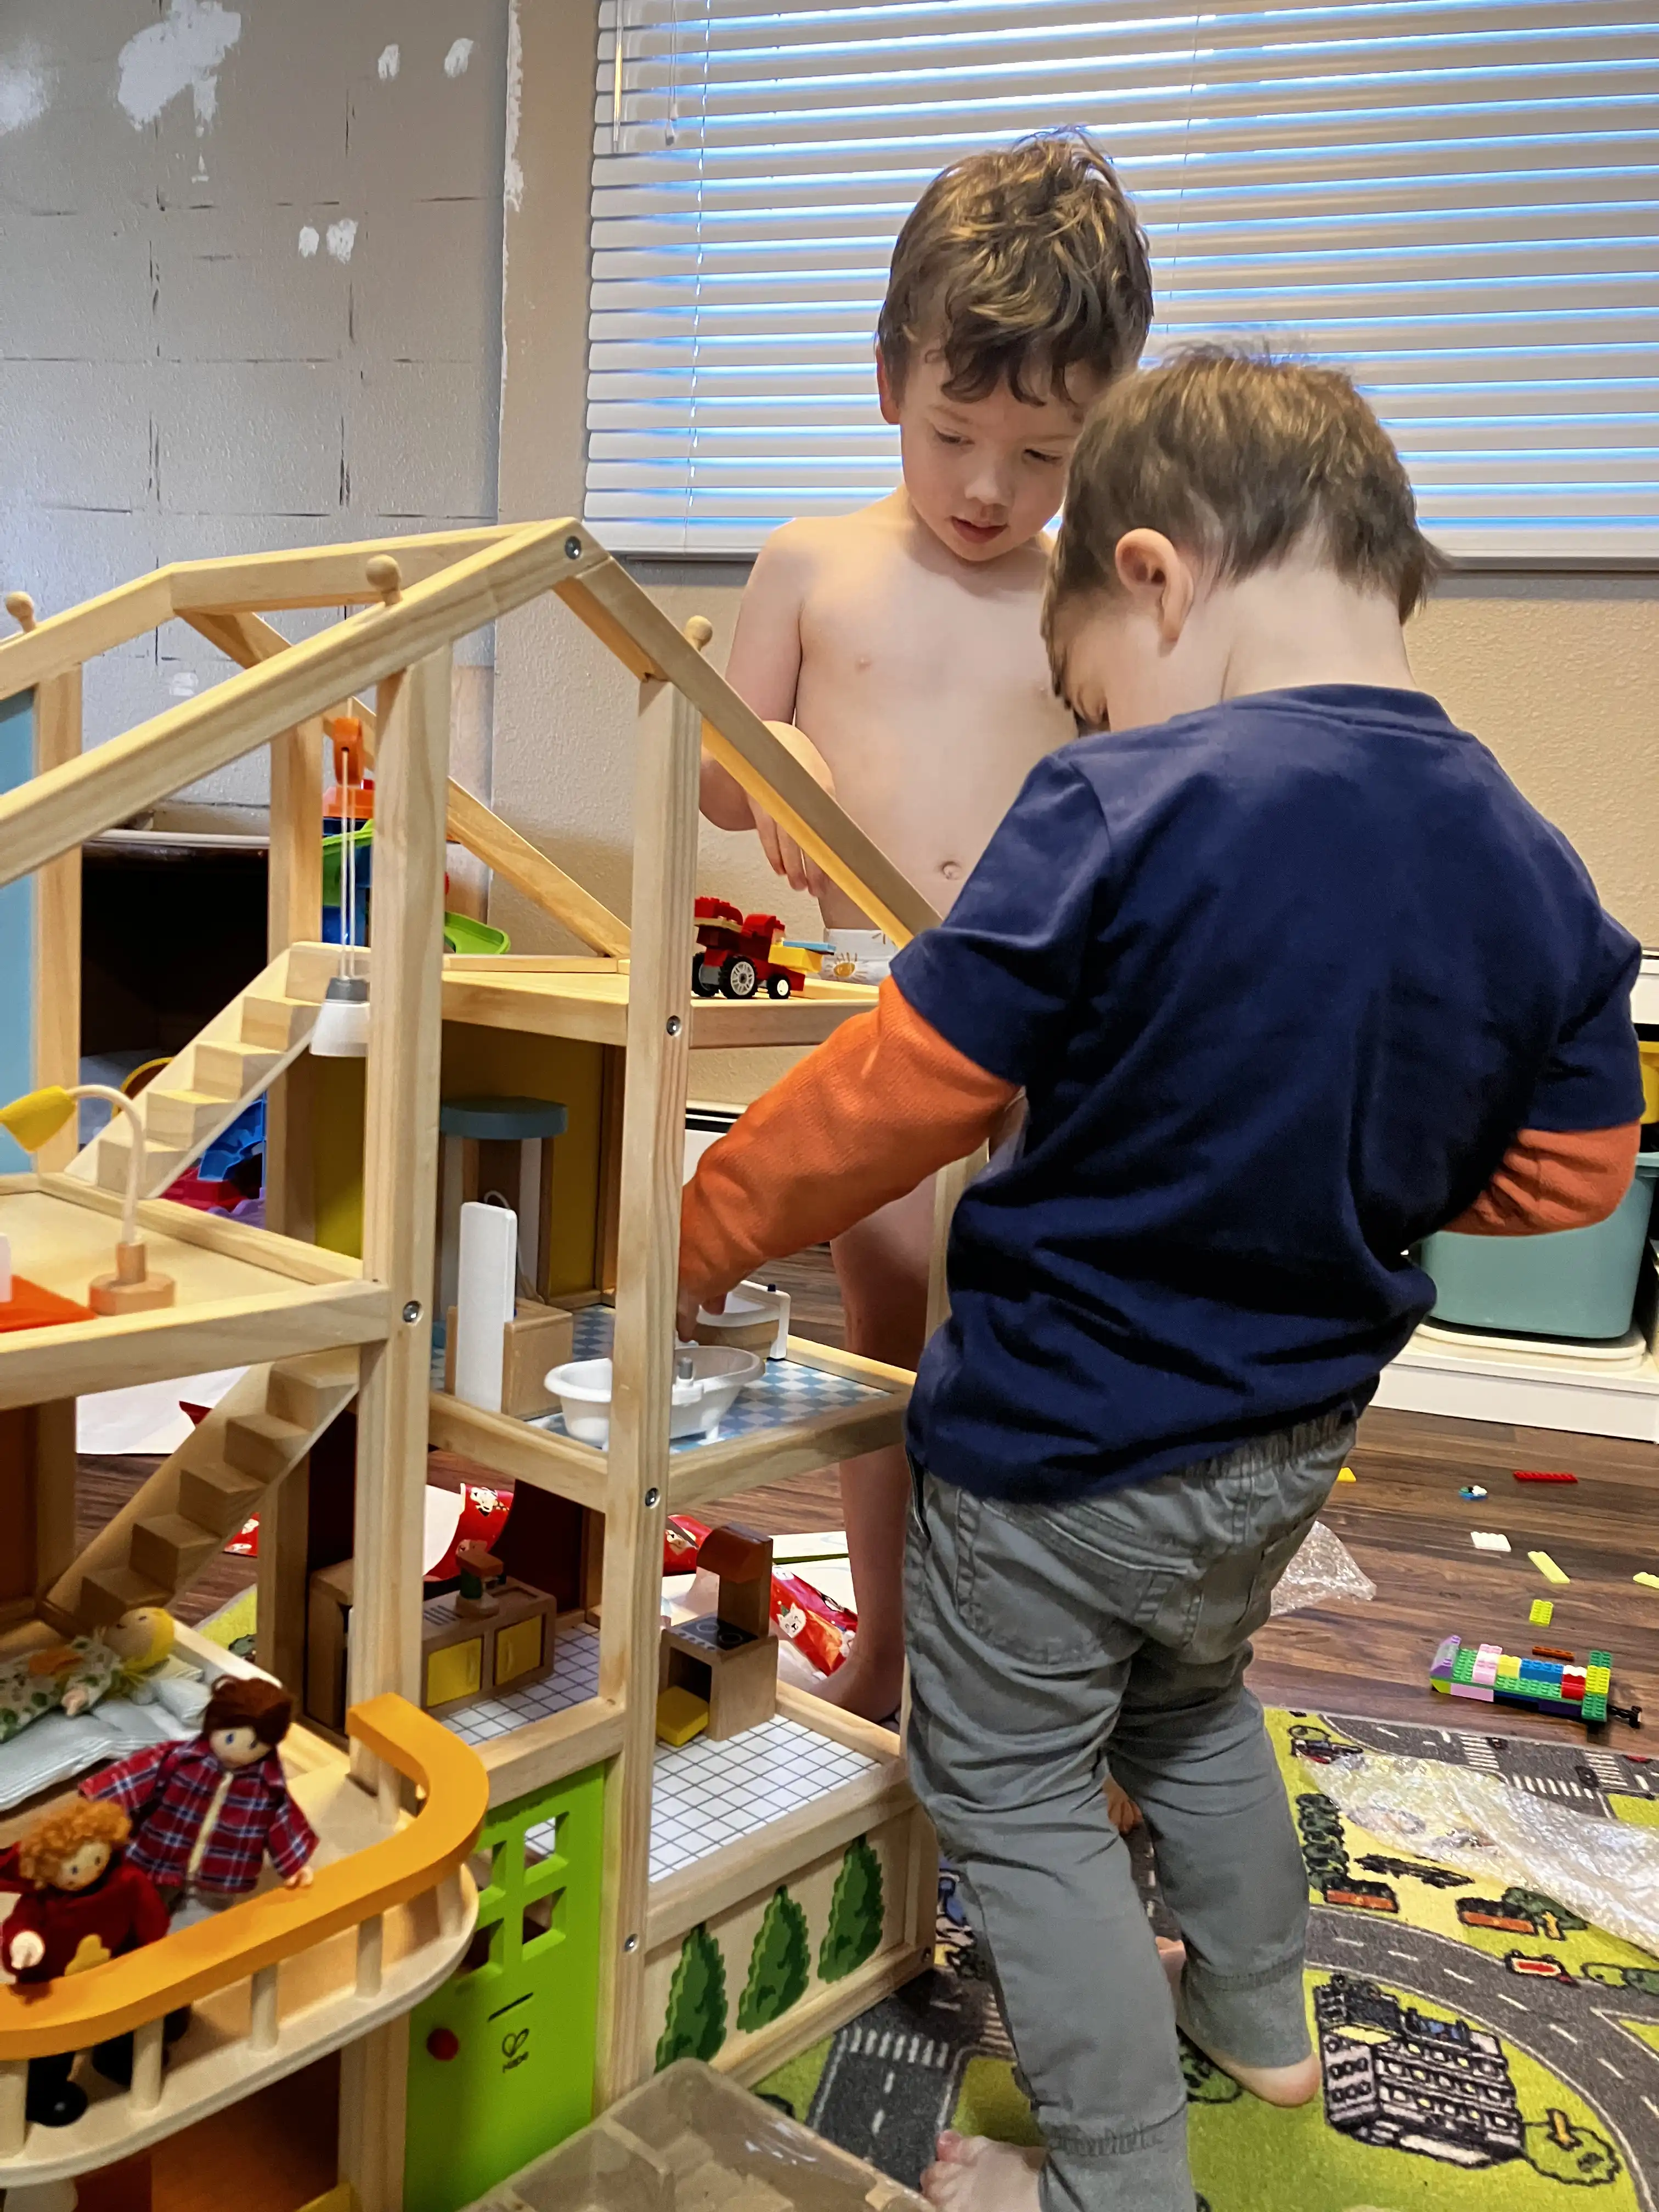 Royal and Graham play with Royal's new wooden dollhouse. Royal is putting one of the dolls into the bathtub, and Graham just placed a lego truck on the third floor.